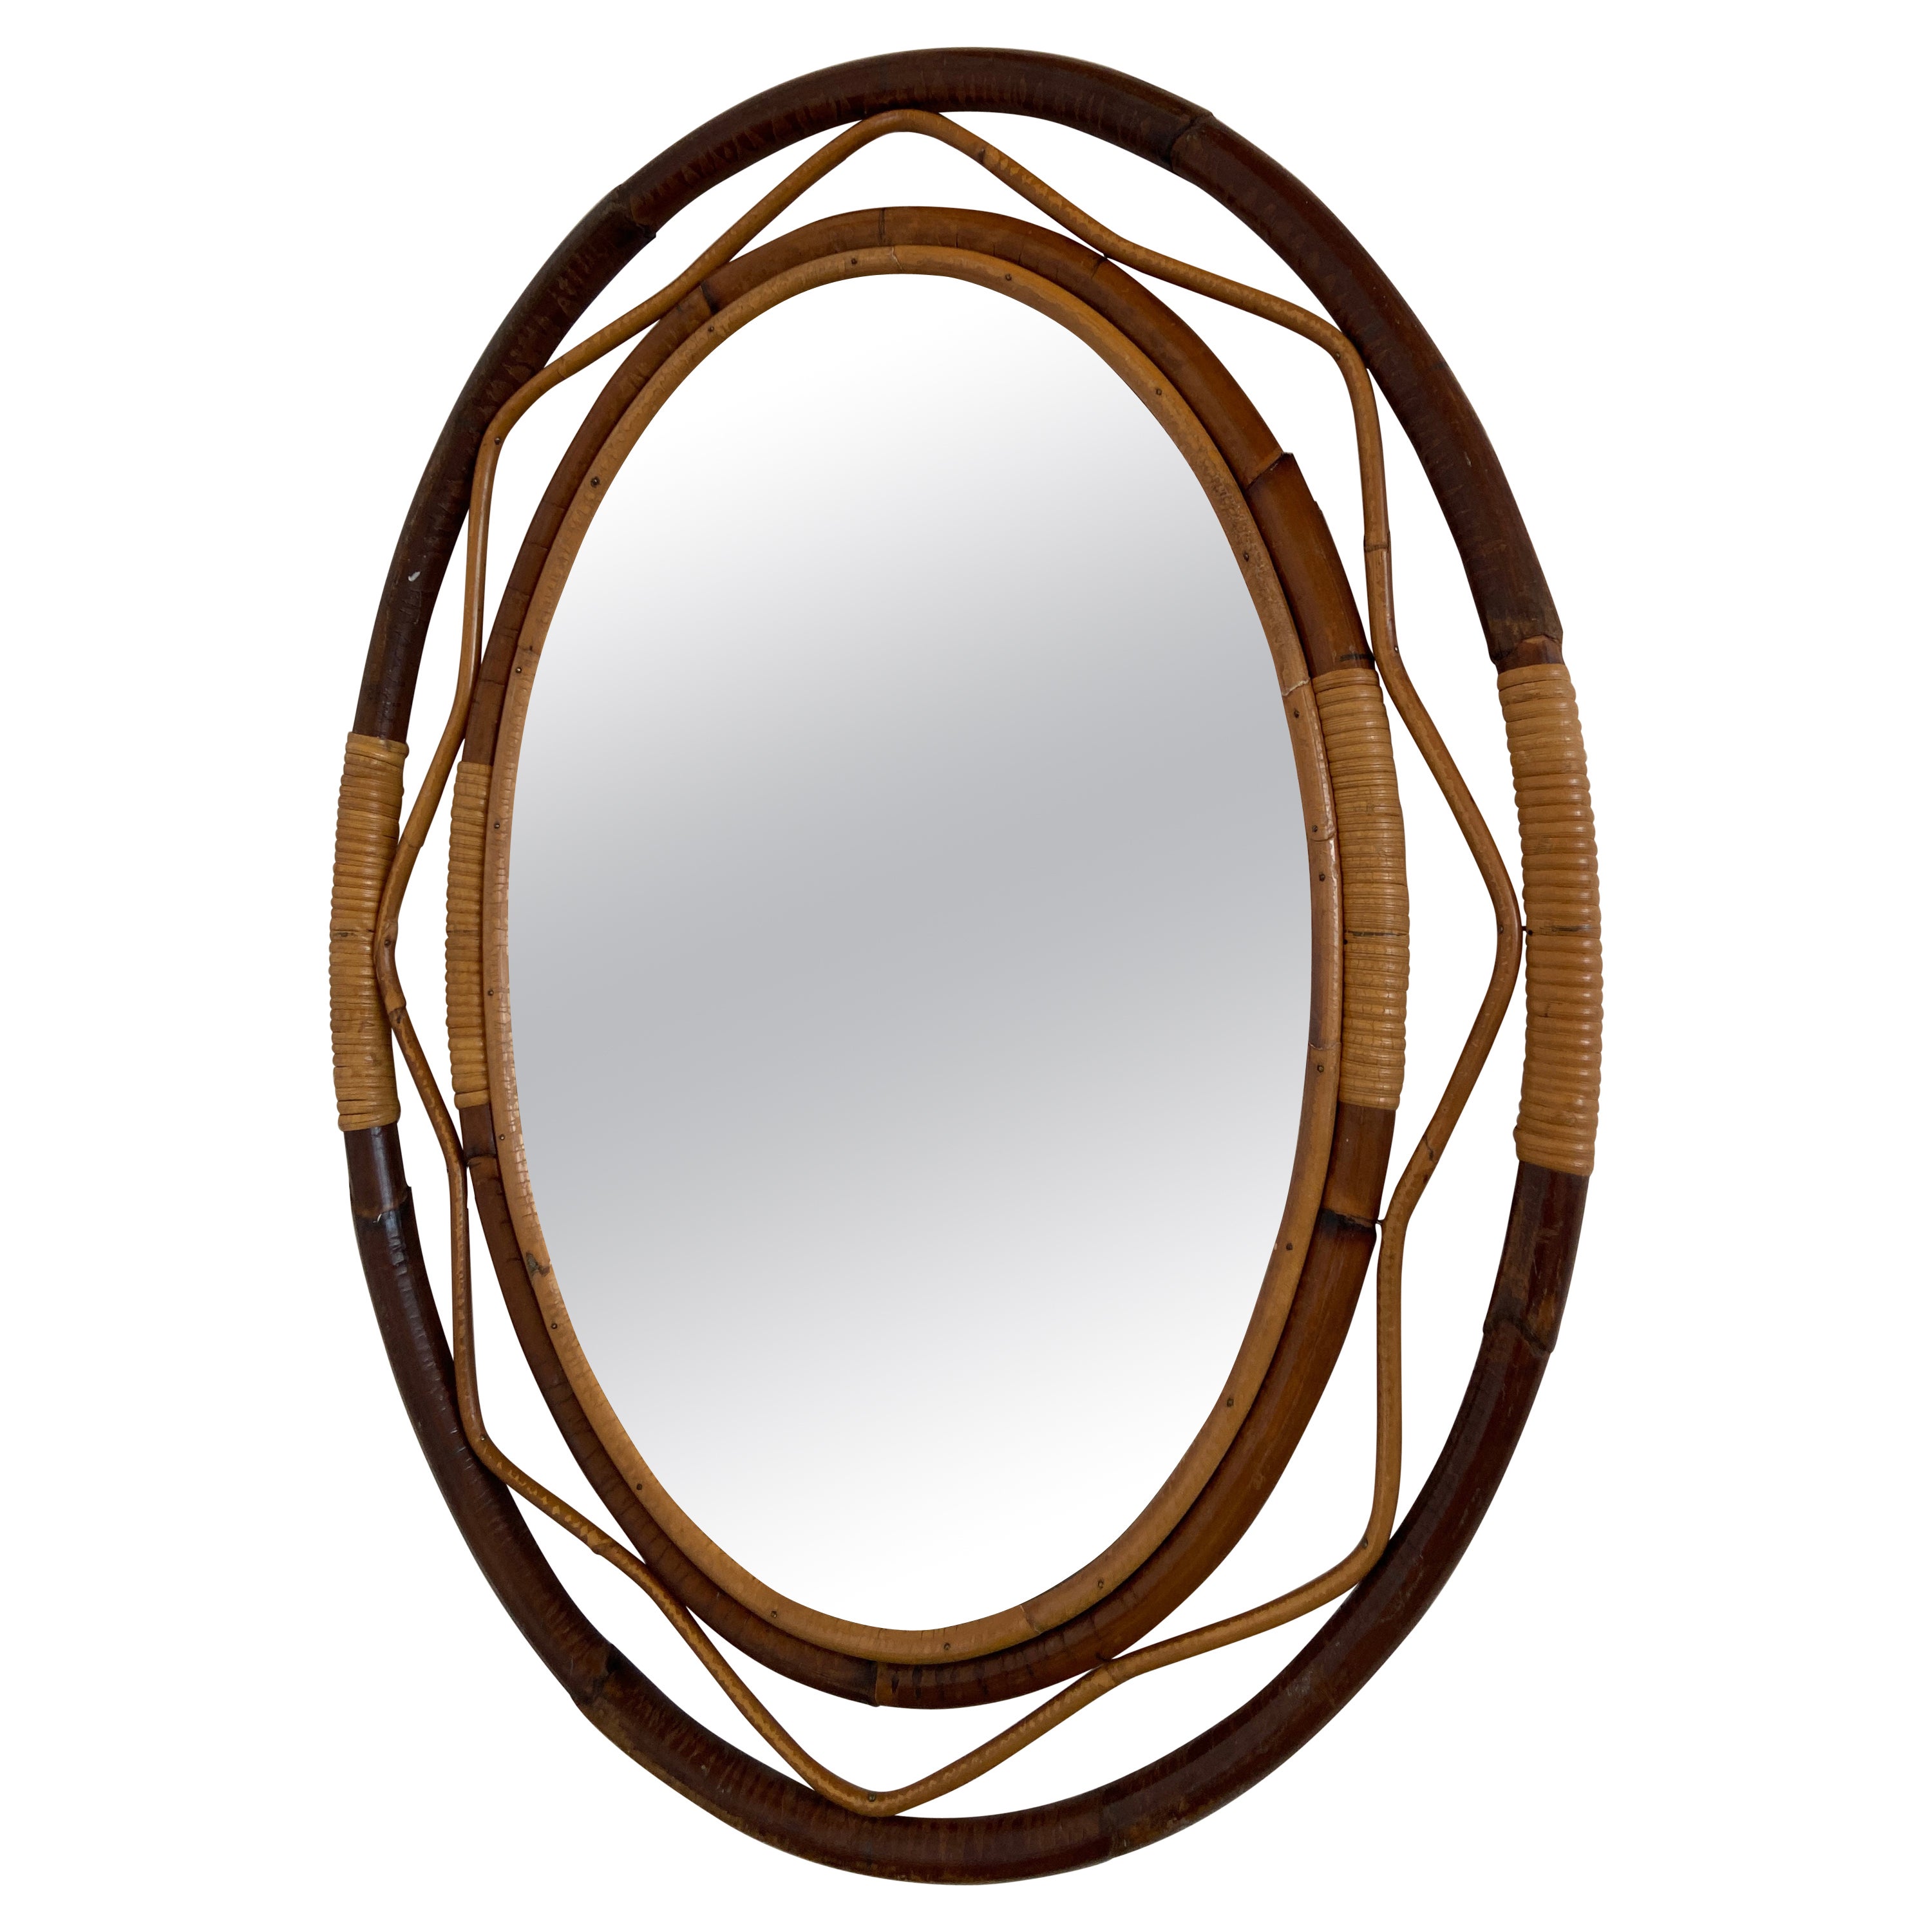 Mid-Century Modern Spanish Wicker and Cane Oval Wall Mirror, 1960s